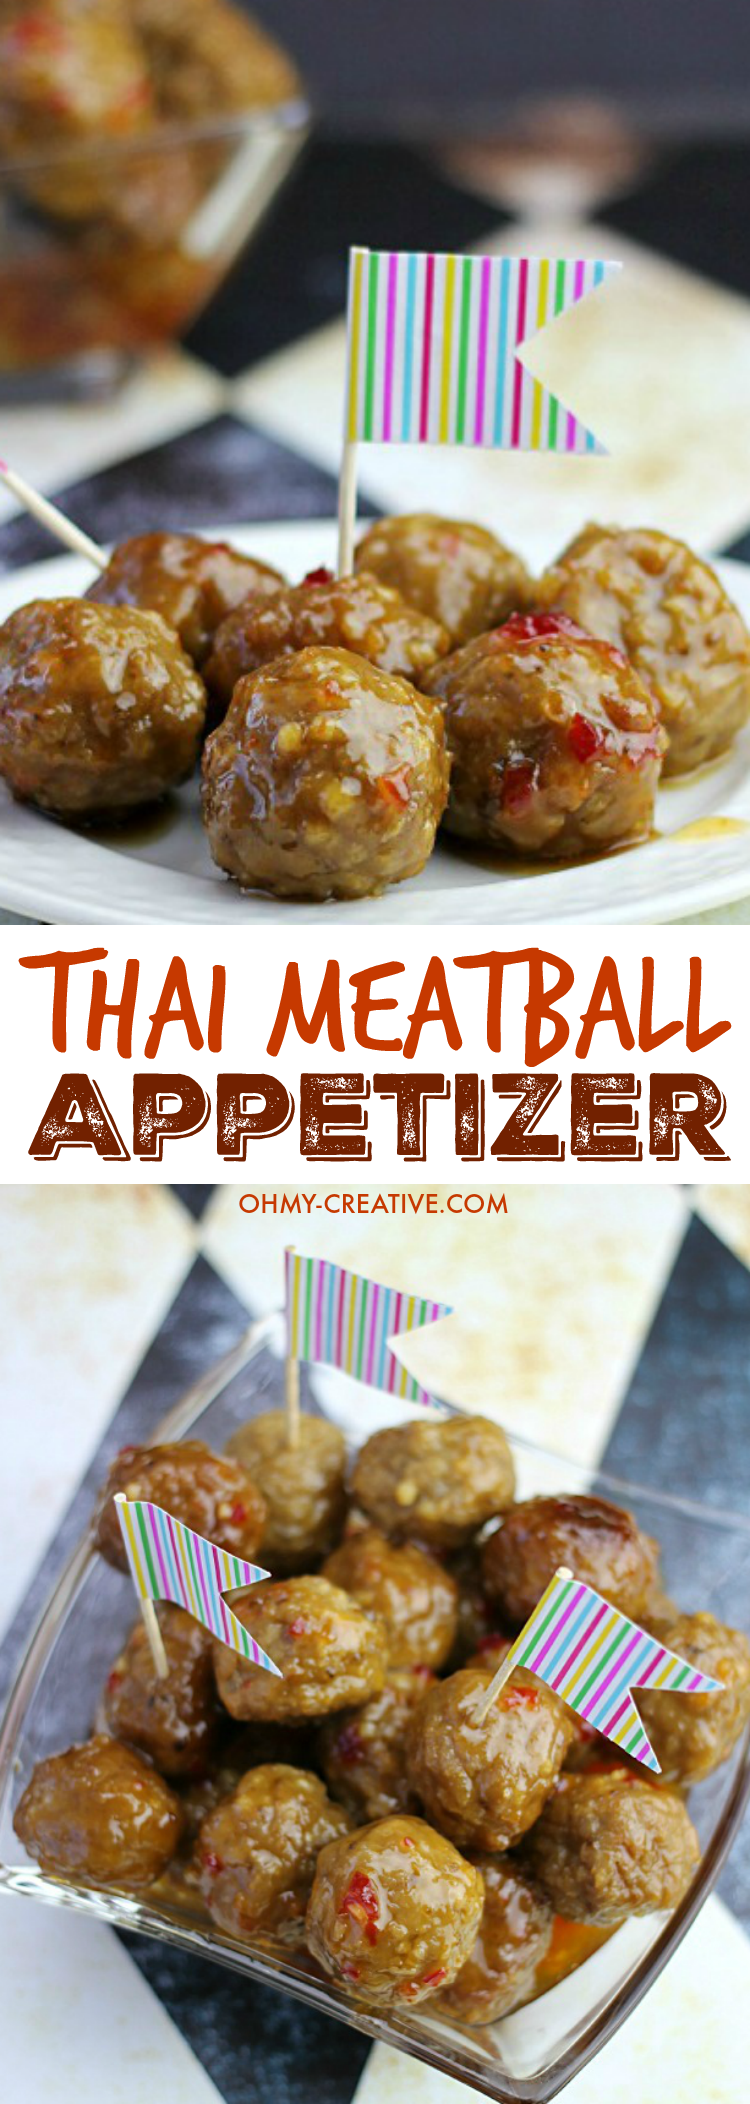 This Thai Meatballs Recipe is delicious Crock Pot dish perfect for any occasion! Great when hosting parties or to take on the go, this dish will deliver! | OHMY-CREATIVE.COM #meatballappetizer #thaimeatballs